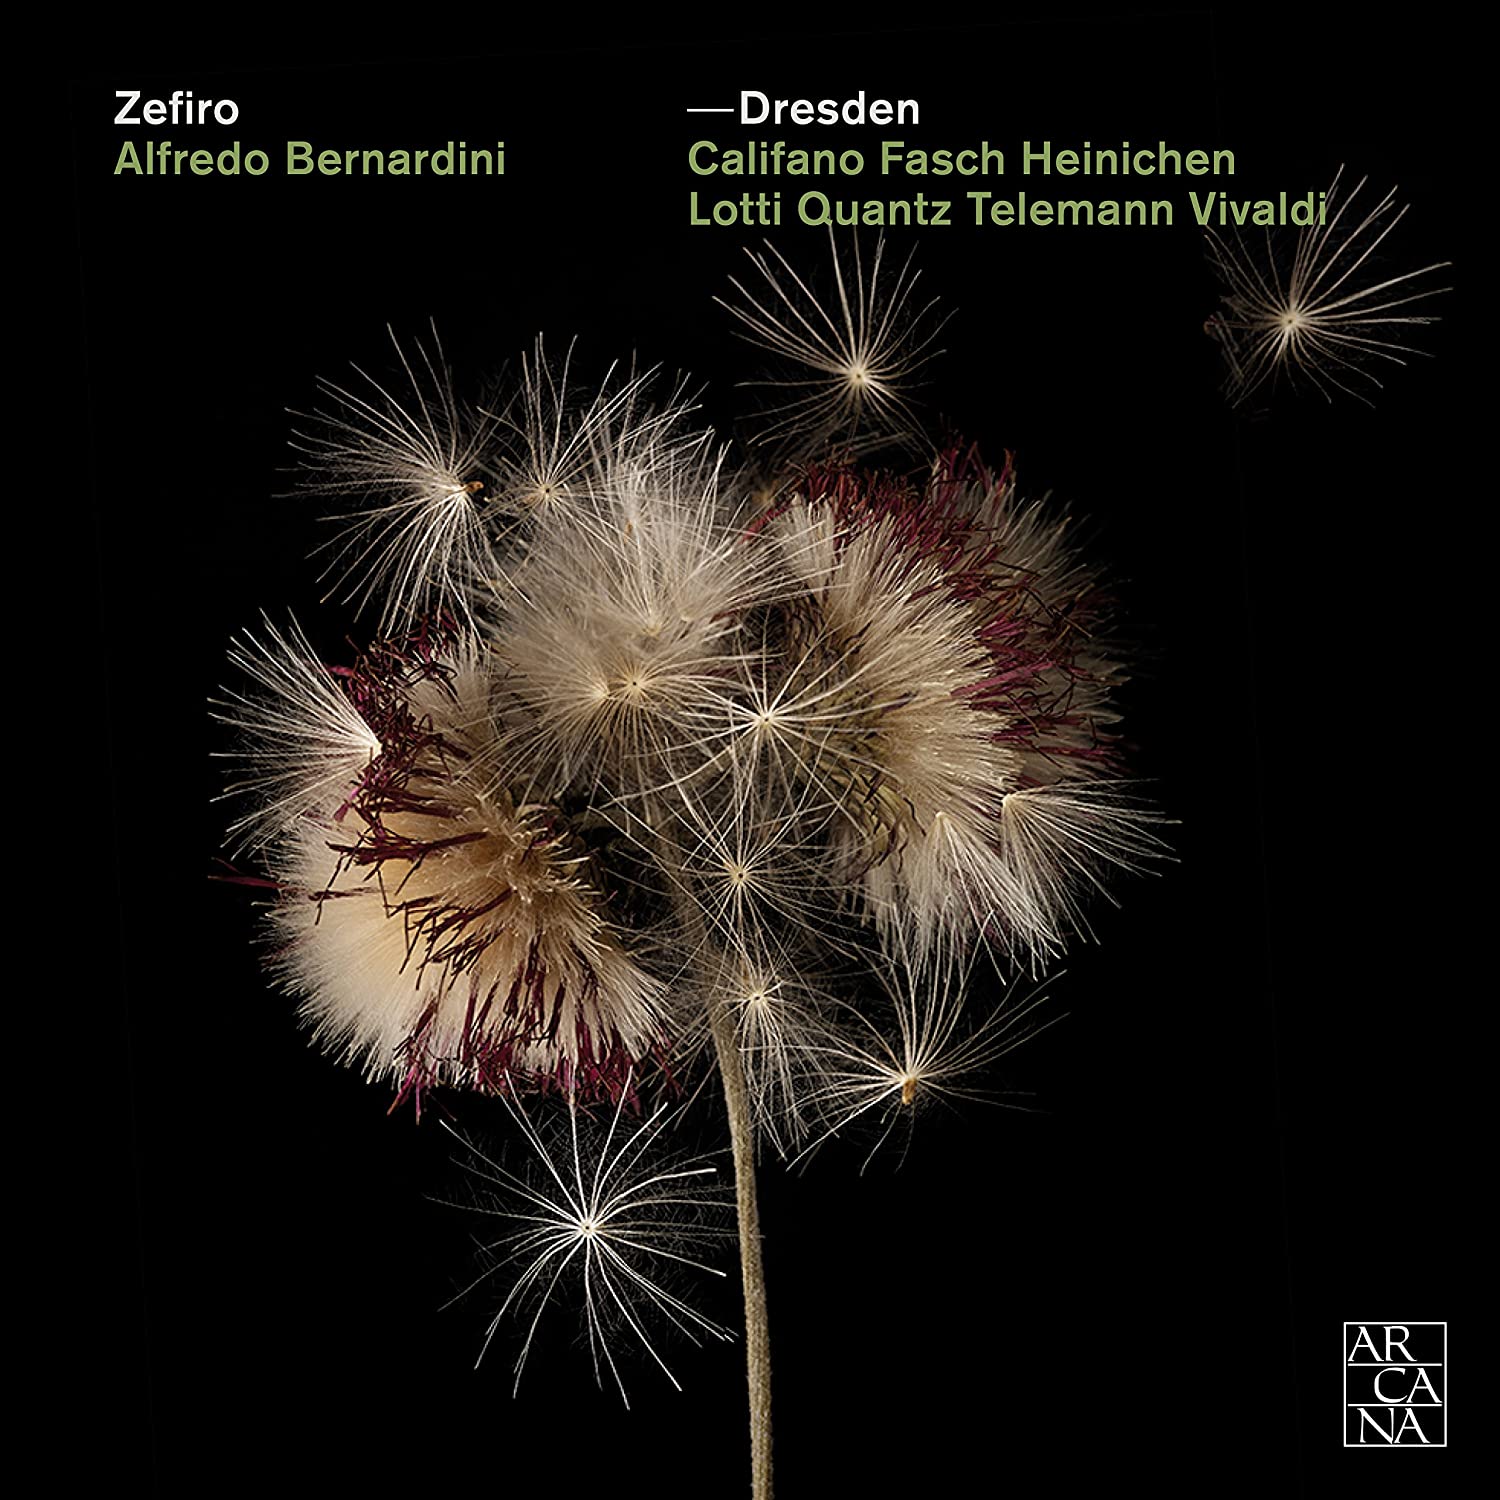 Cover of Zeifro CD devoted to Dresden baroque chamber music